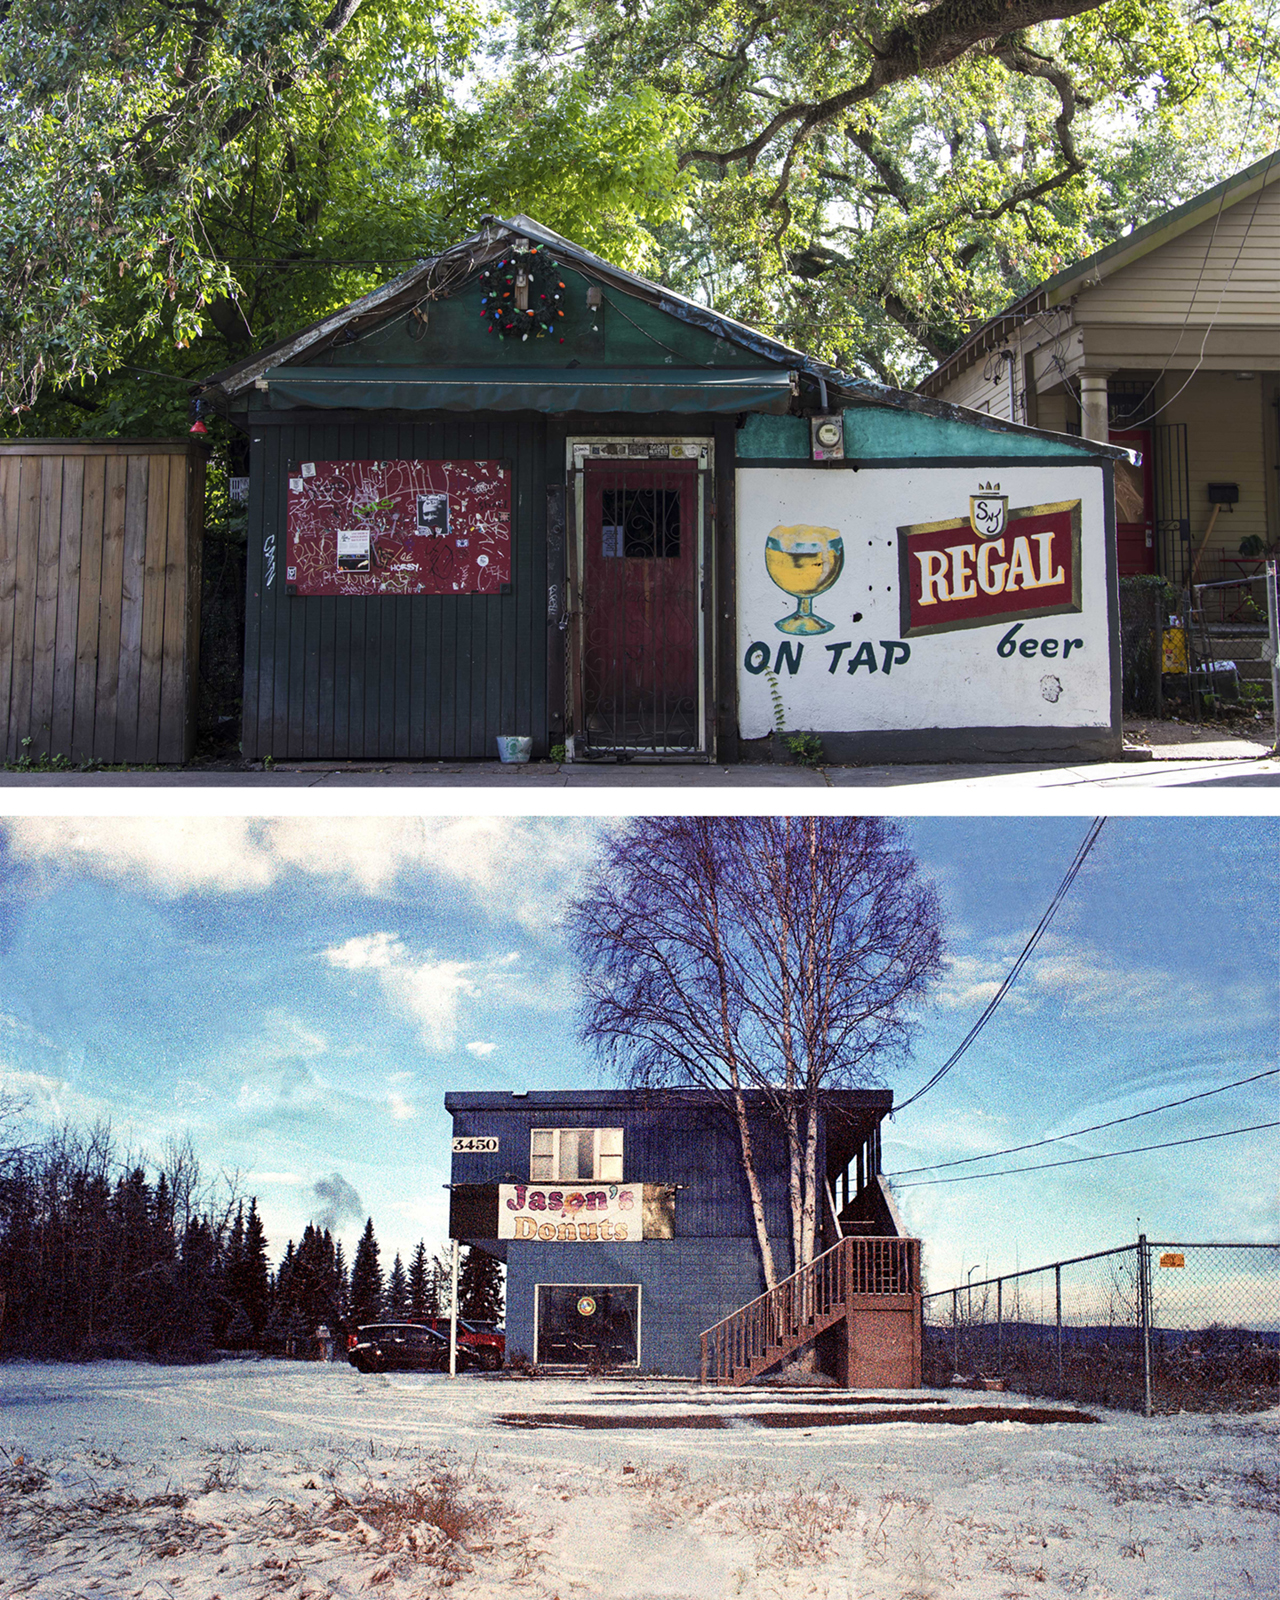 Standalone buildings in Alaska and Louisiana, courtesy of the artist